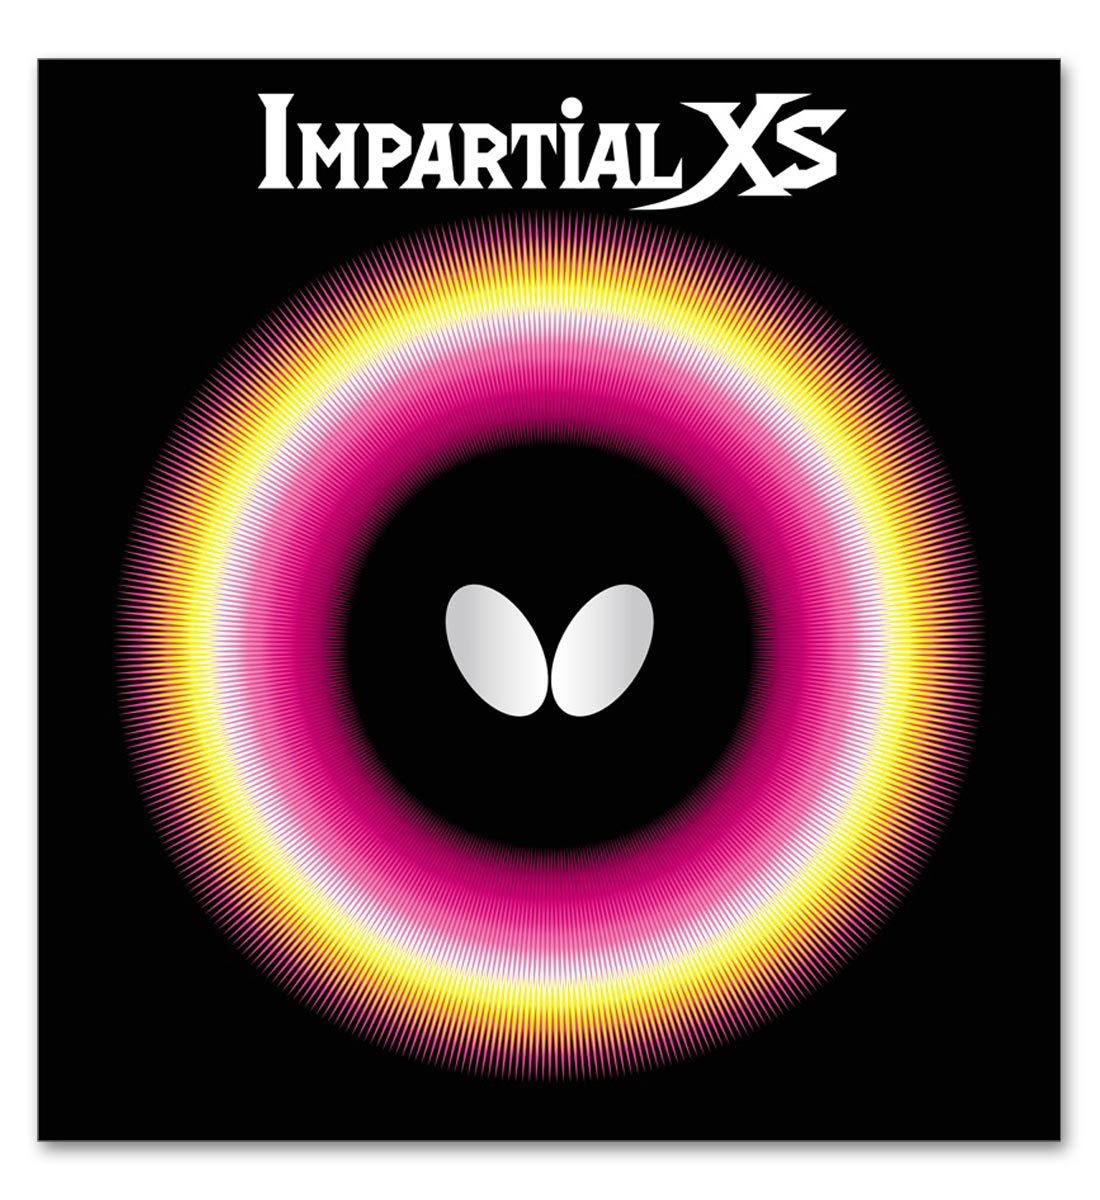 How many grams approx for a cut sheet of 1.9 Butterfly Impartial XS?